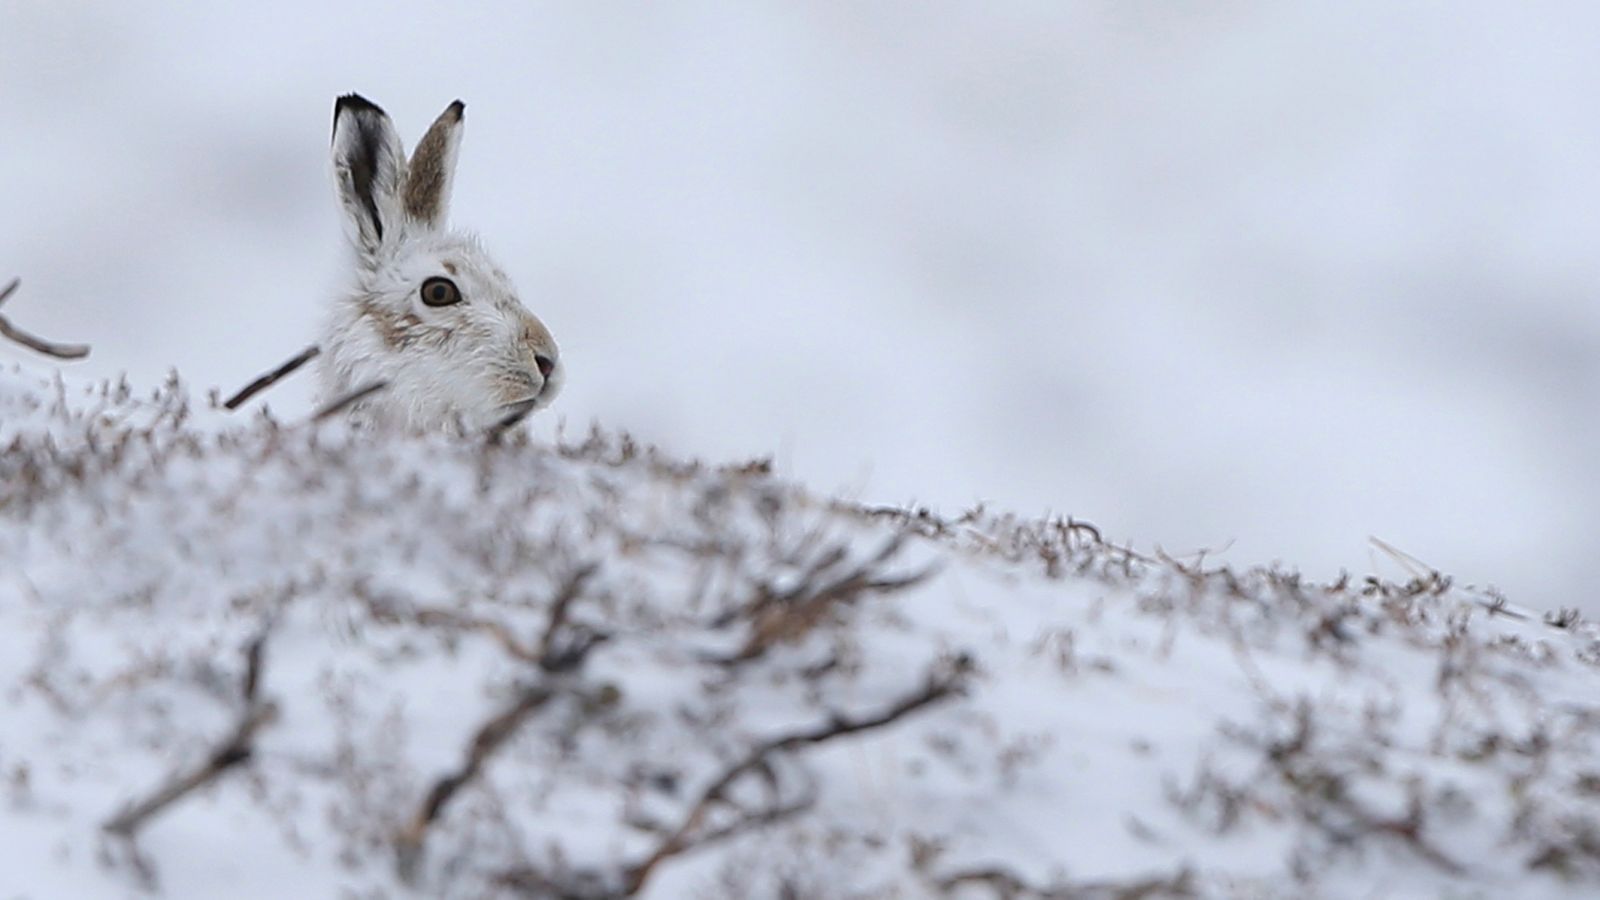 Climate change: Mountain hares ‘losing winter camouflage’ due to more snowless days